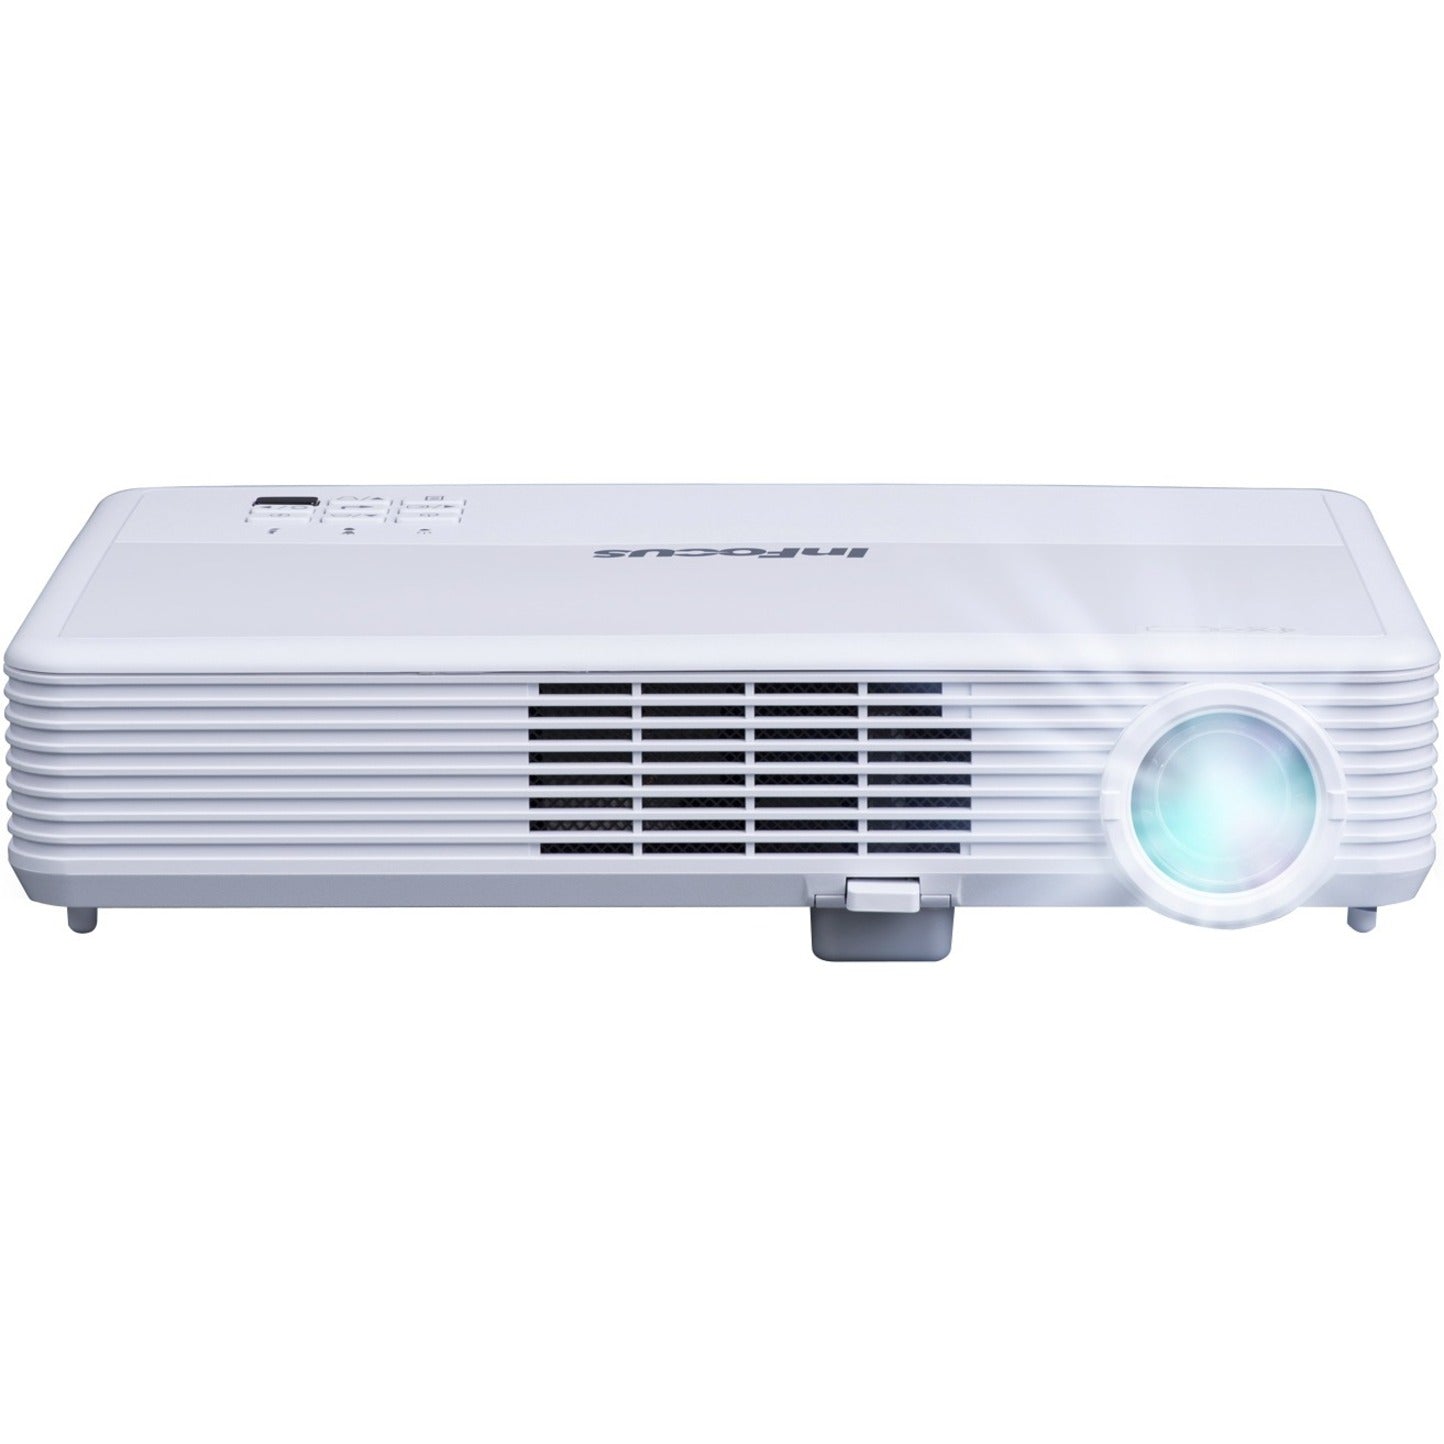 InFocus IN1188HD LED Projector, Full HD, 3000 lm, 16:9